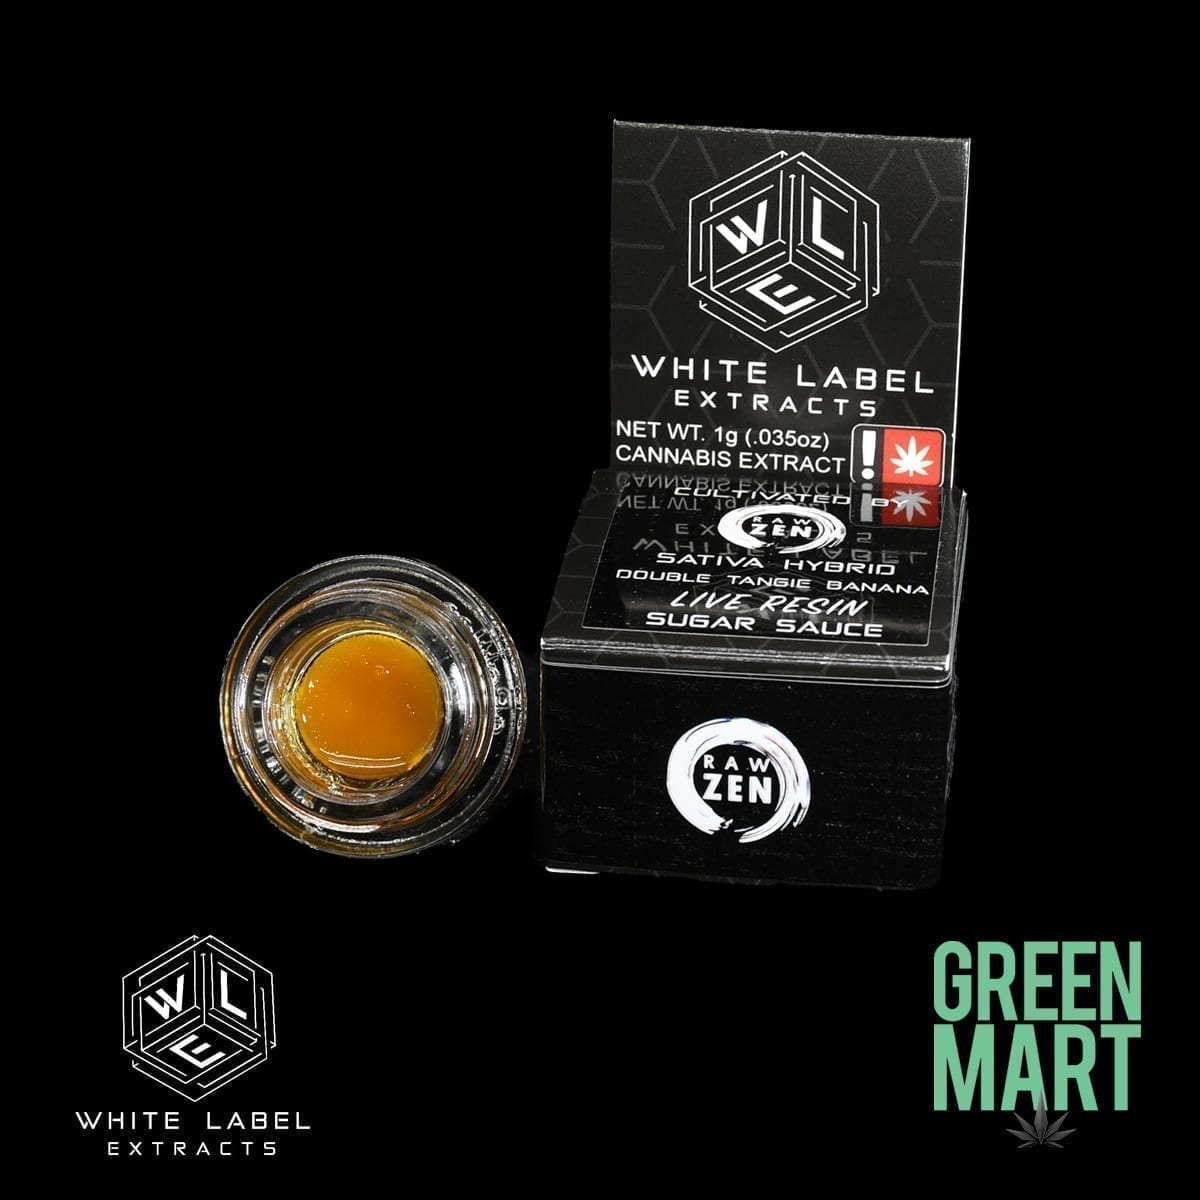 White Label Extracts - Double Tangie Banana Live Resin Sugar Sauce ...